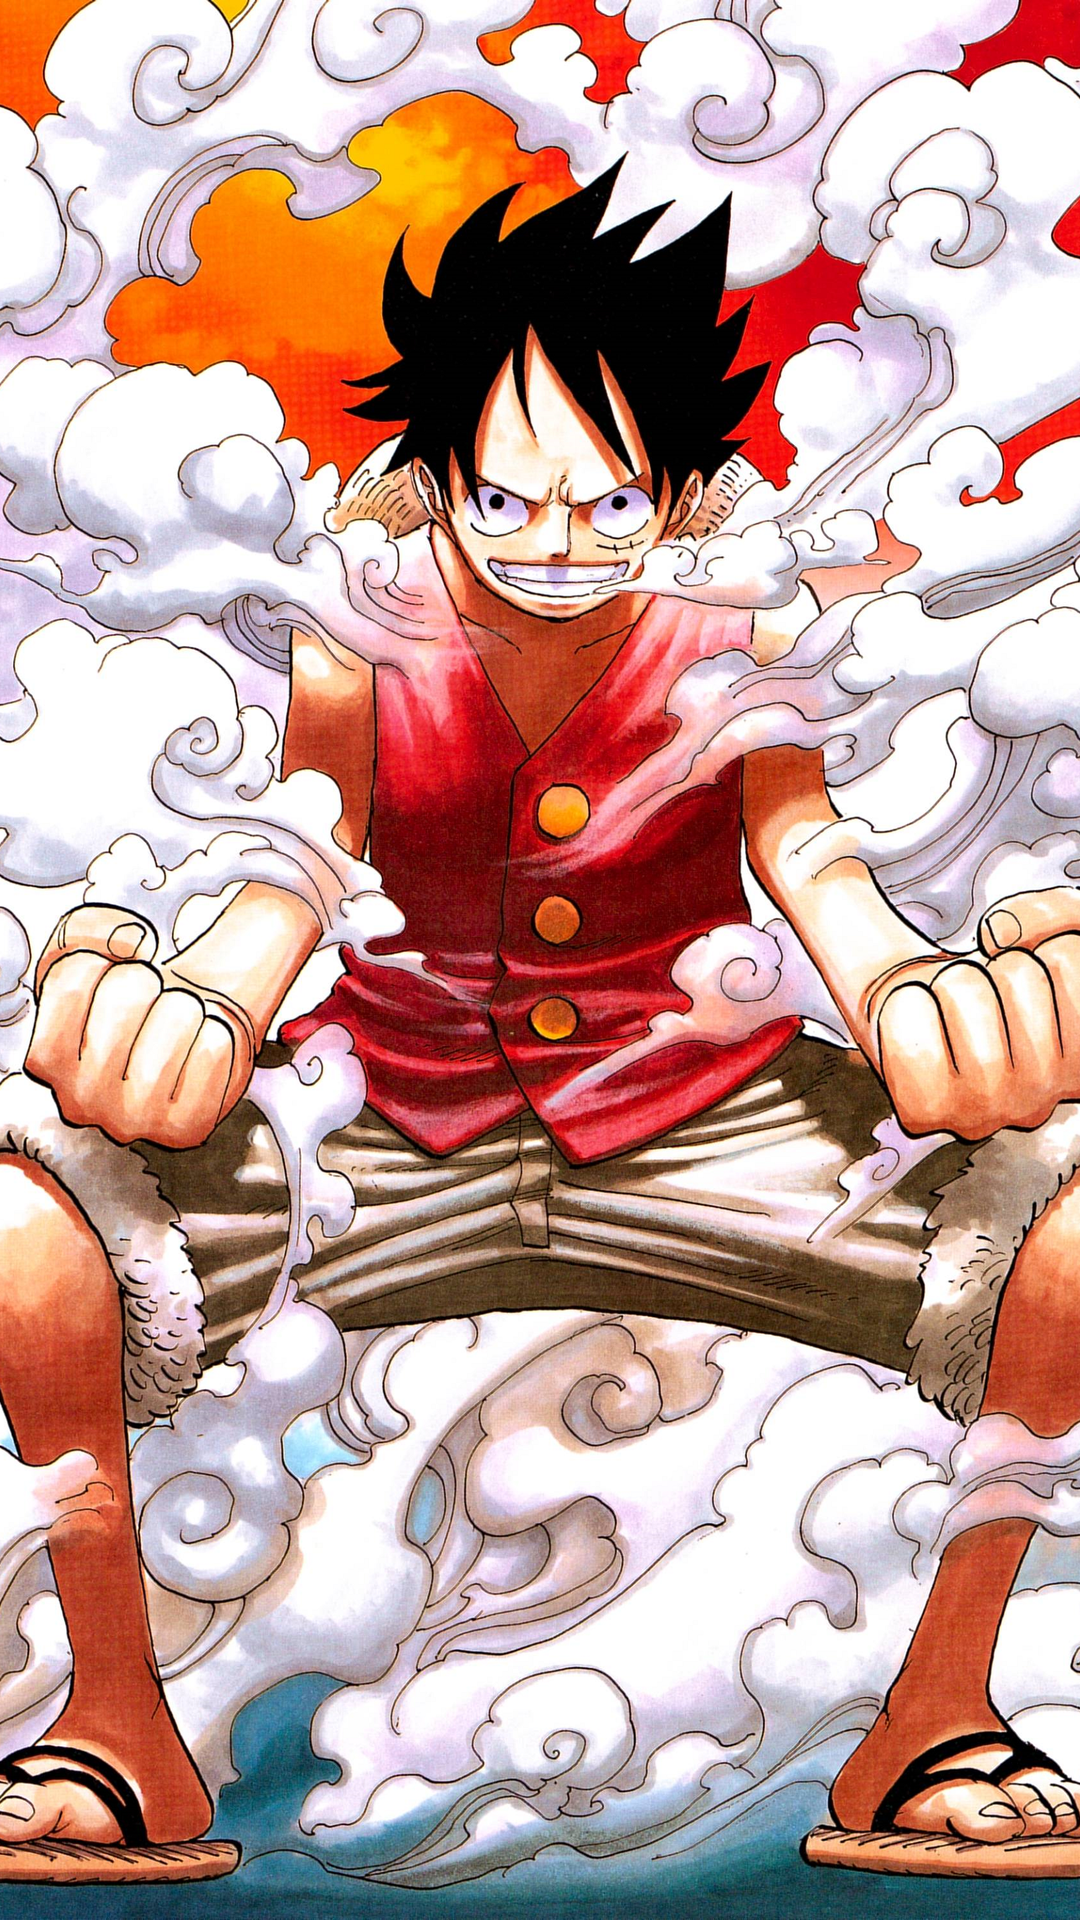 Luffy Hd Wallpapers For Pc - Wallpaperforu